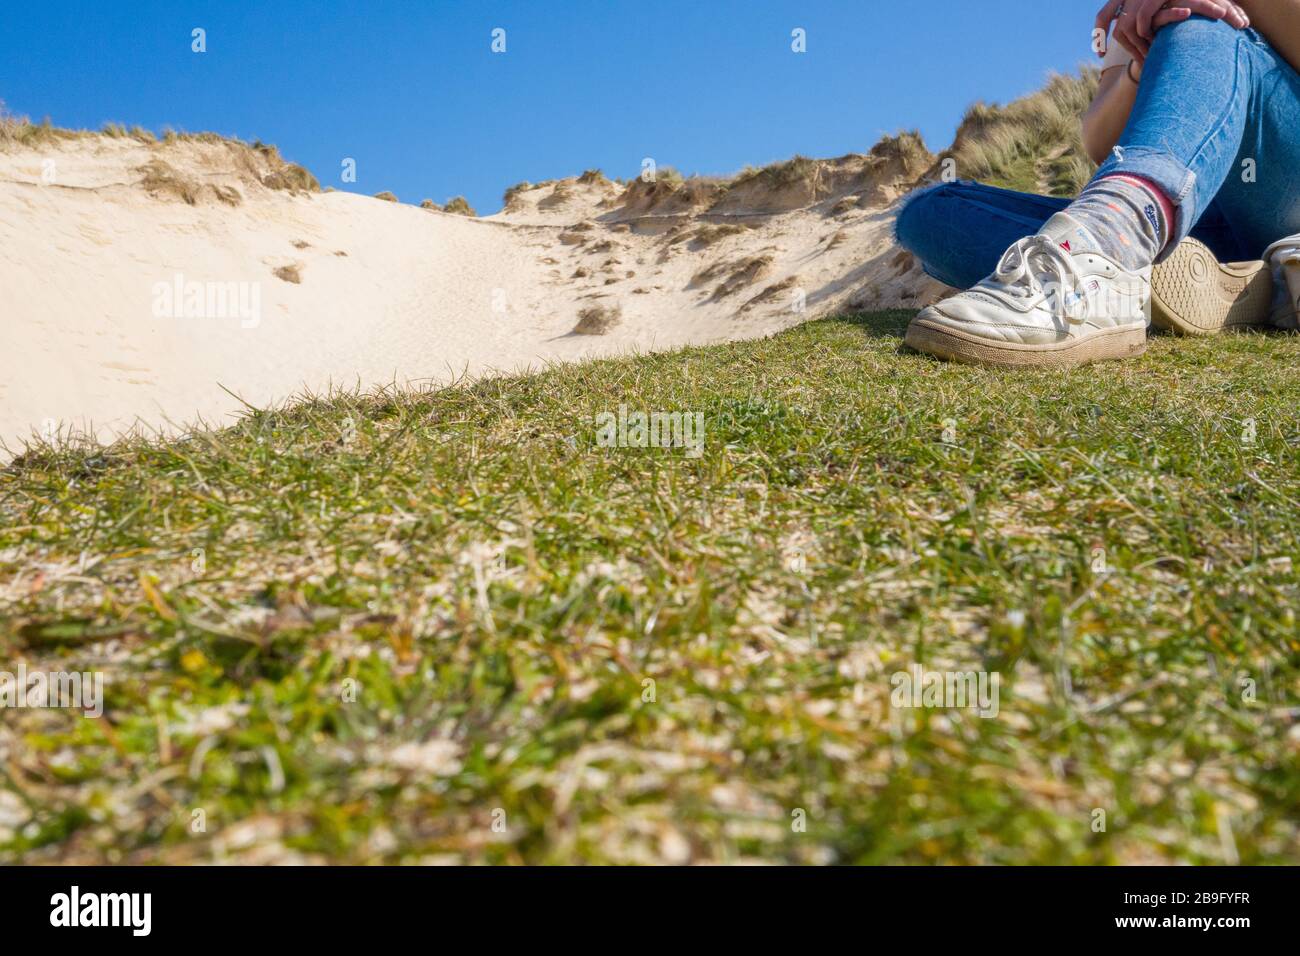 A big sand dune with girls legs in foreground on grass wearing trainers and jeans Stock Photo